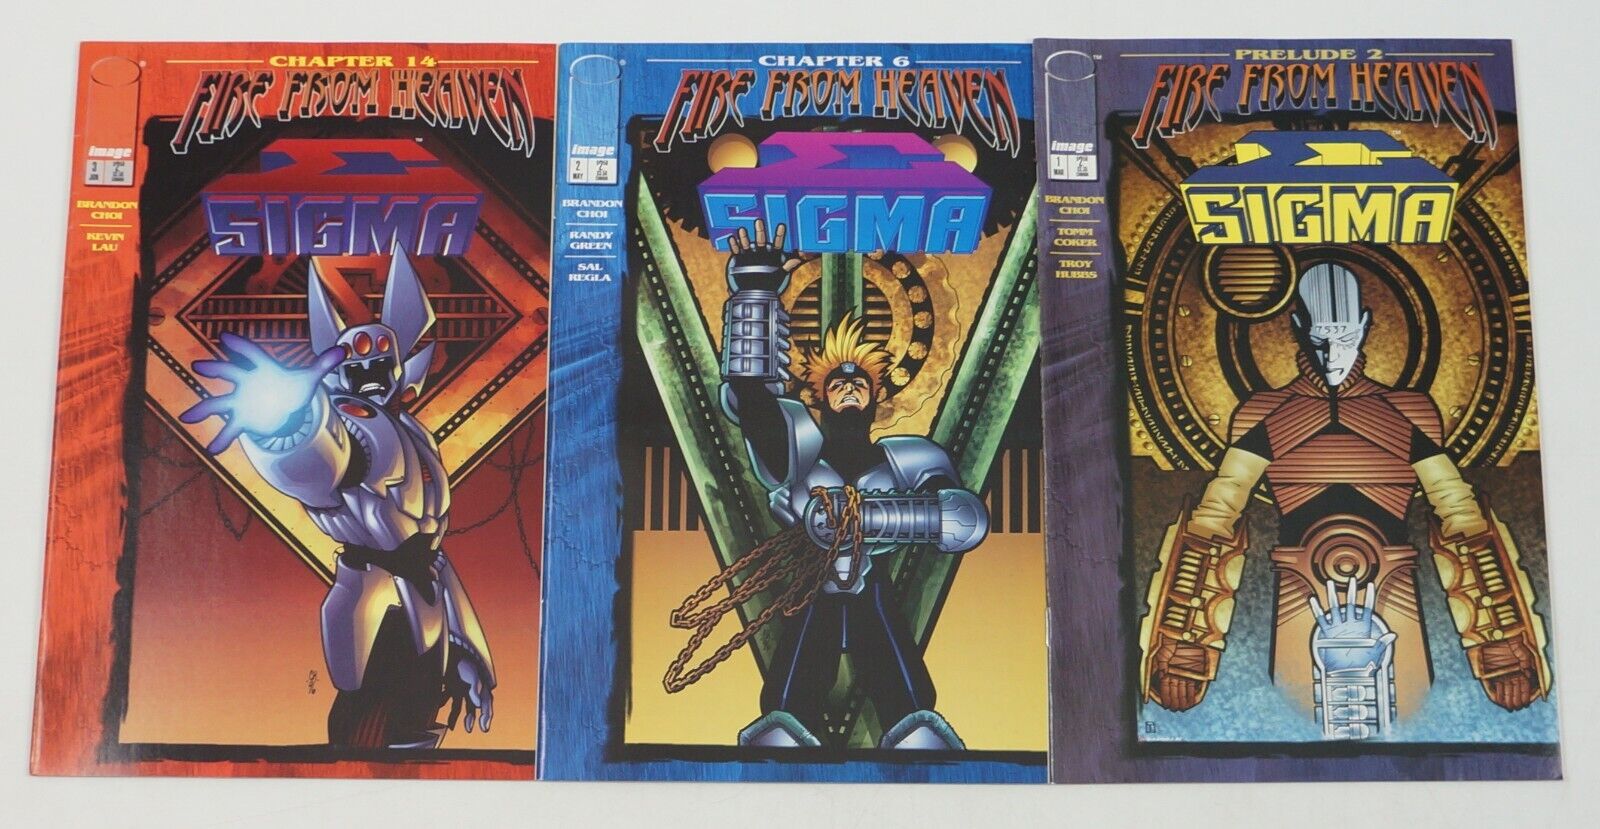 Sigma #1-3 VF complete series - Fire from Heaven crossover Image Comics set 2